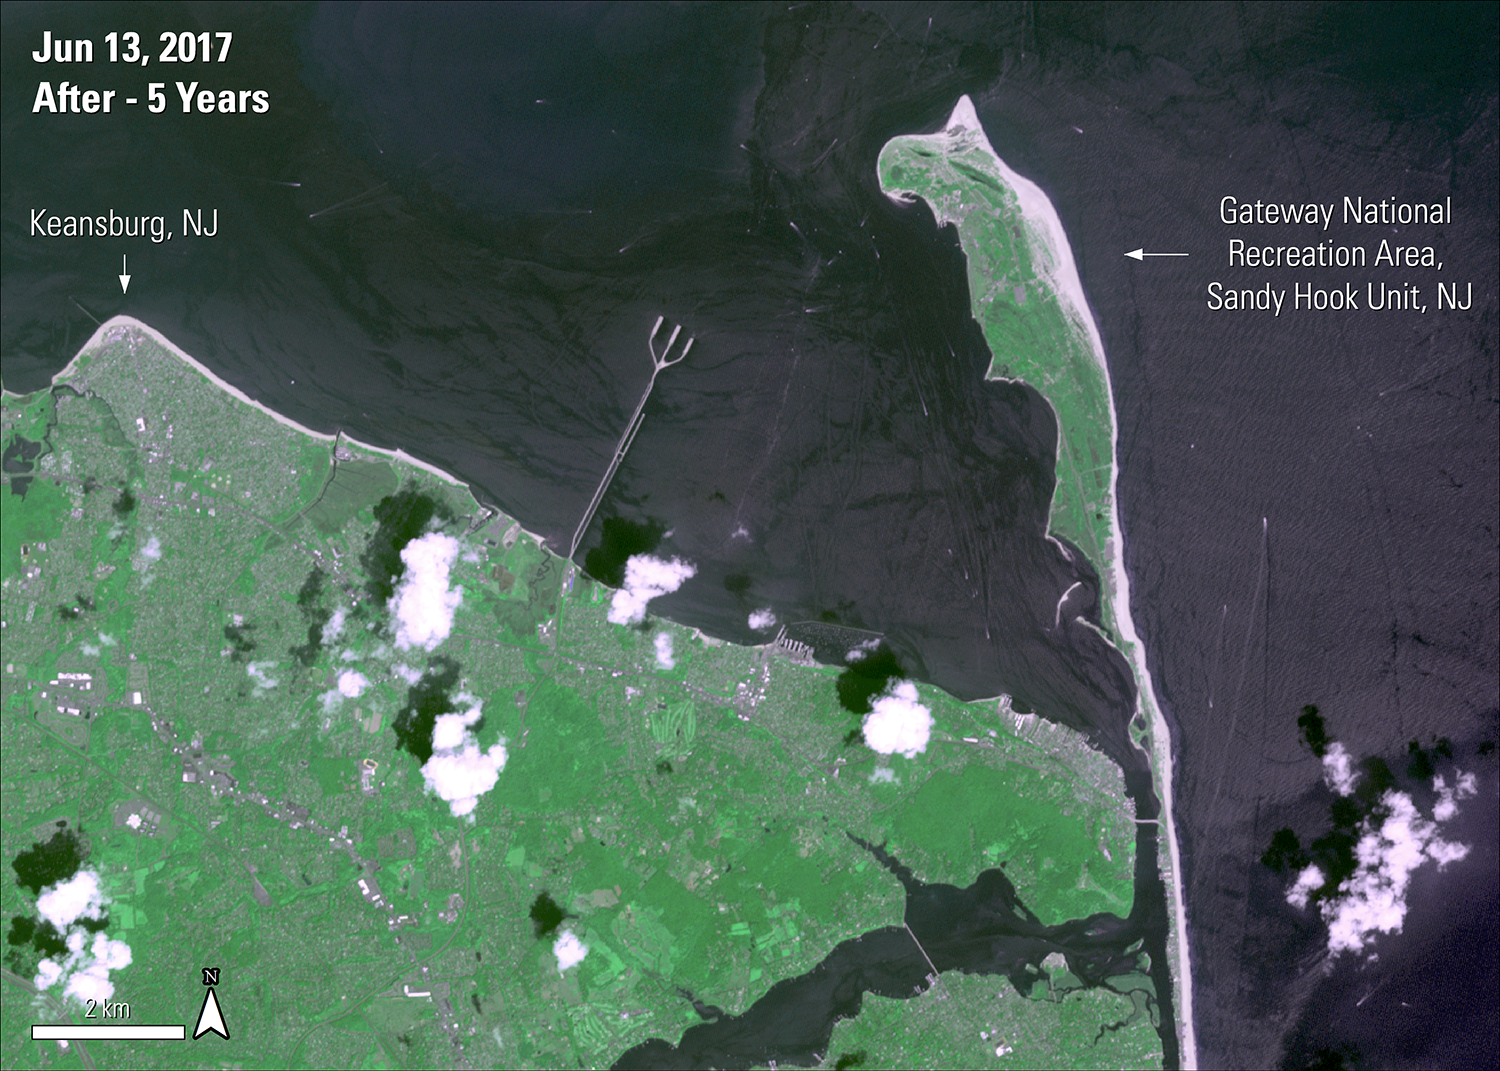 Terra ASTER surface reflectance imagery over part of New Jersey 5 years after Hurricane Sandy.